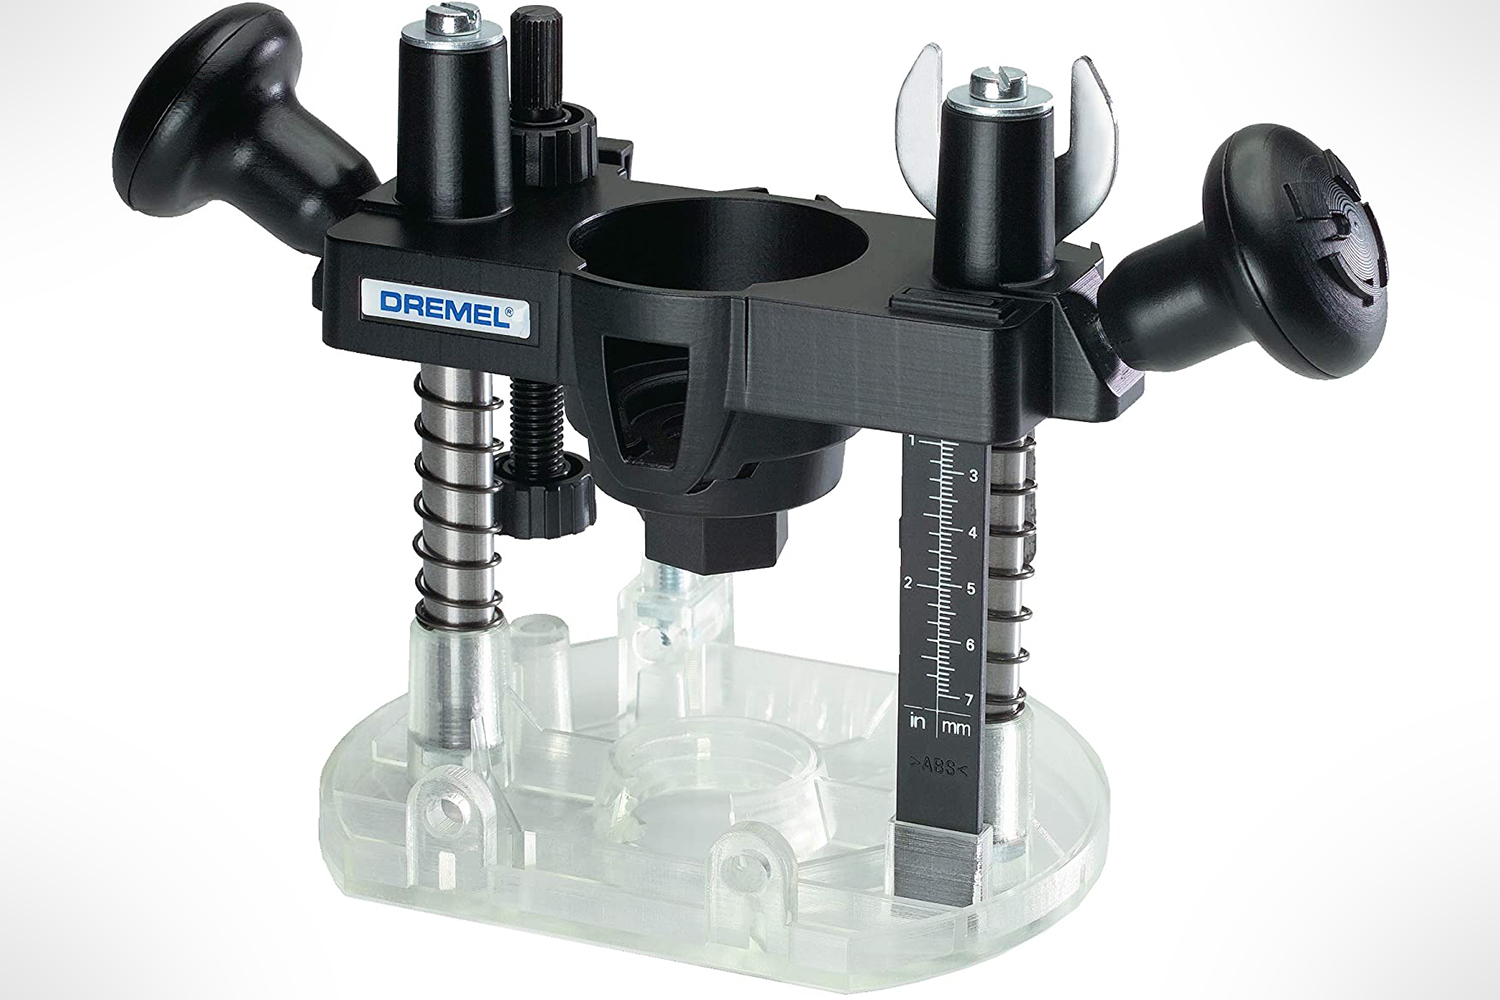 Dremel 335 Plunge Router Tool Attachment for Precision Routing Cutting, 